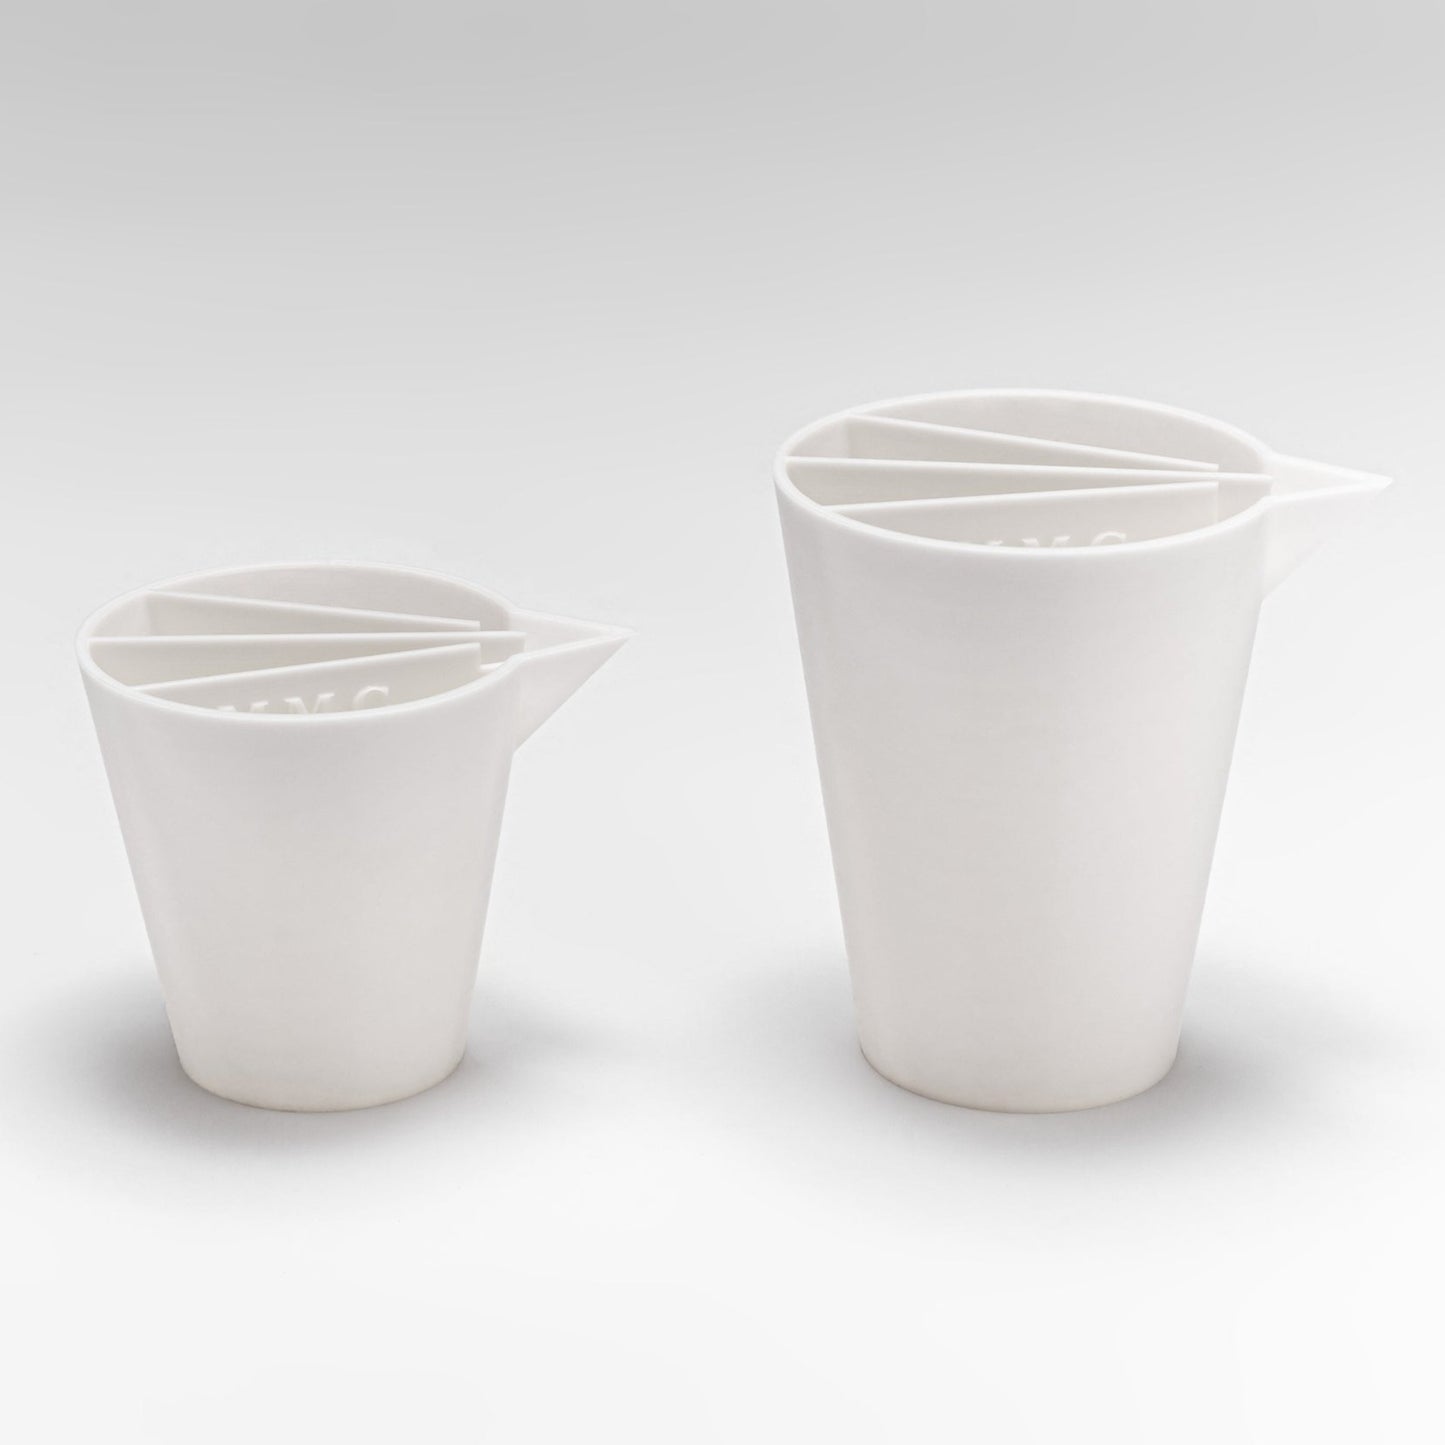 Acrylic Pouring Plastic TRIPLE Split Cup 10 or 16 oz with 4 compartments